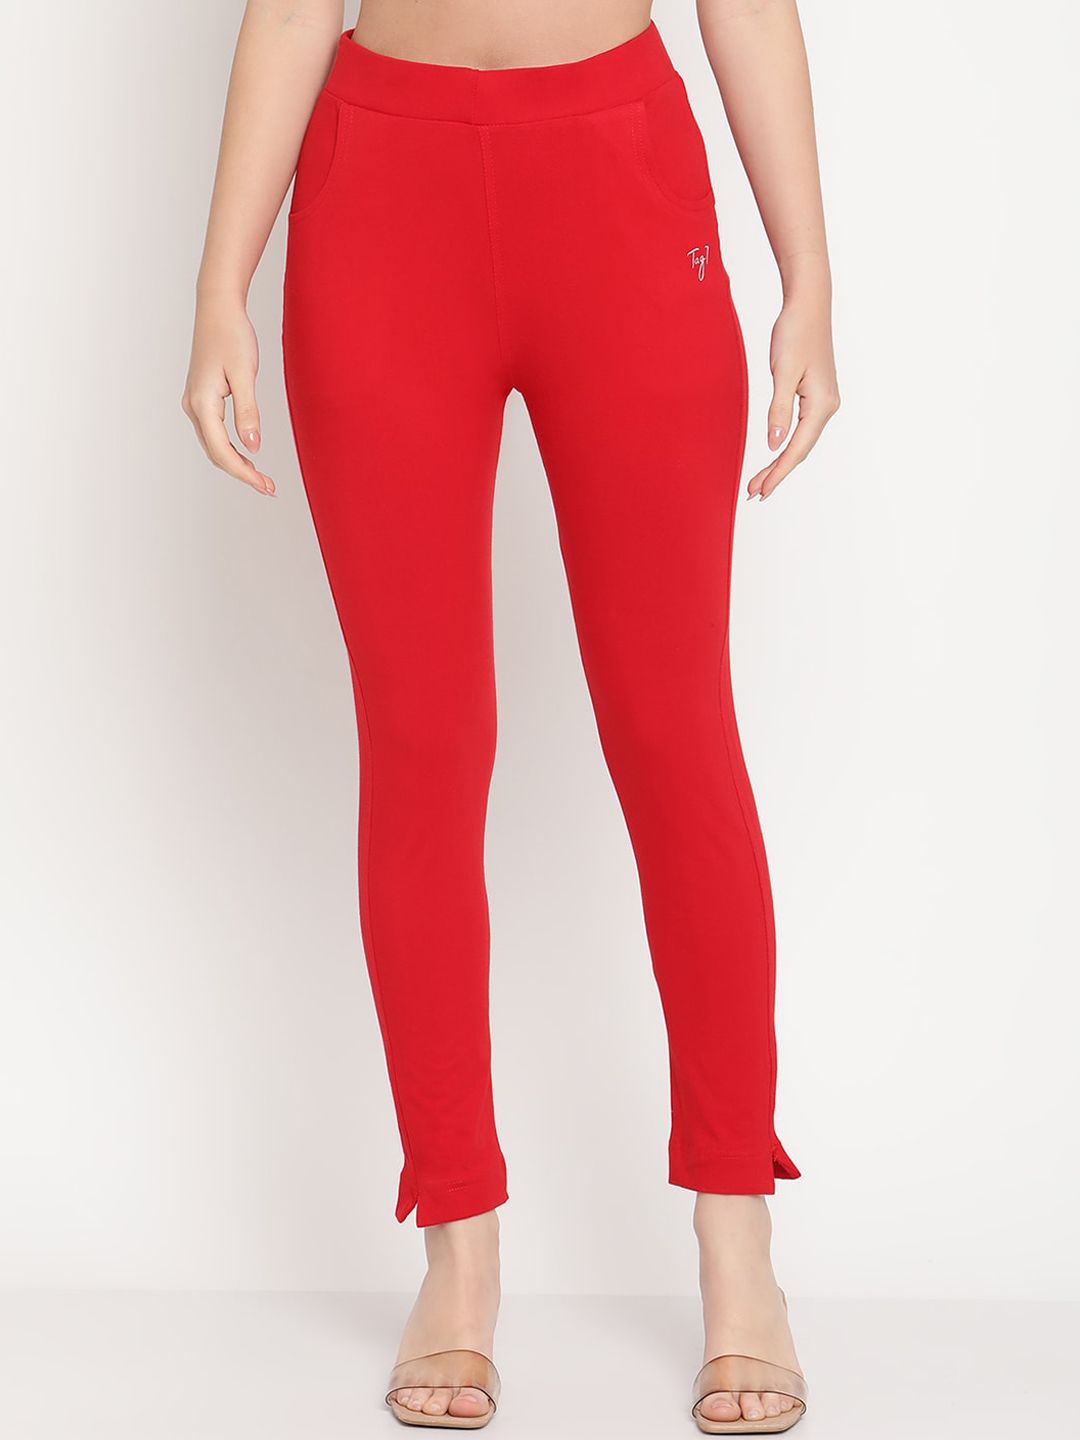 TAG 7 Women Red Solid Ankle-Length Leggings Price in India